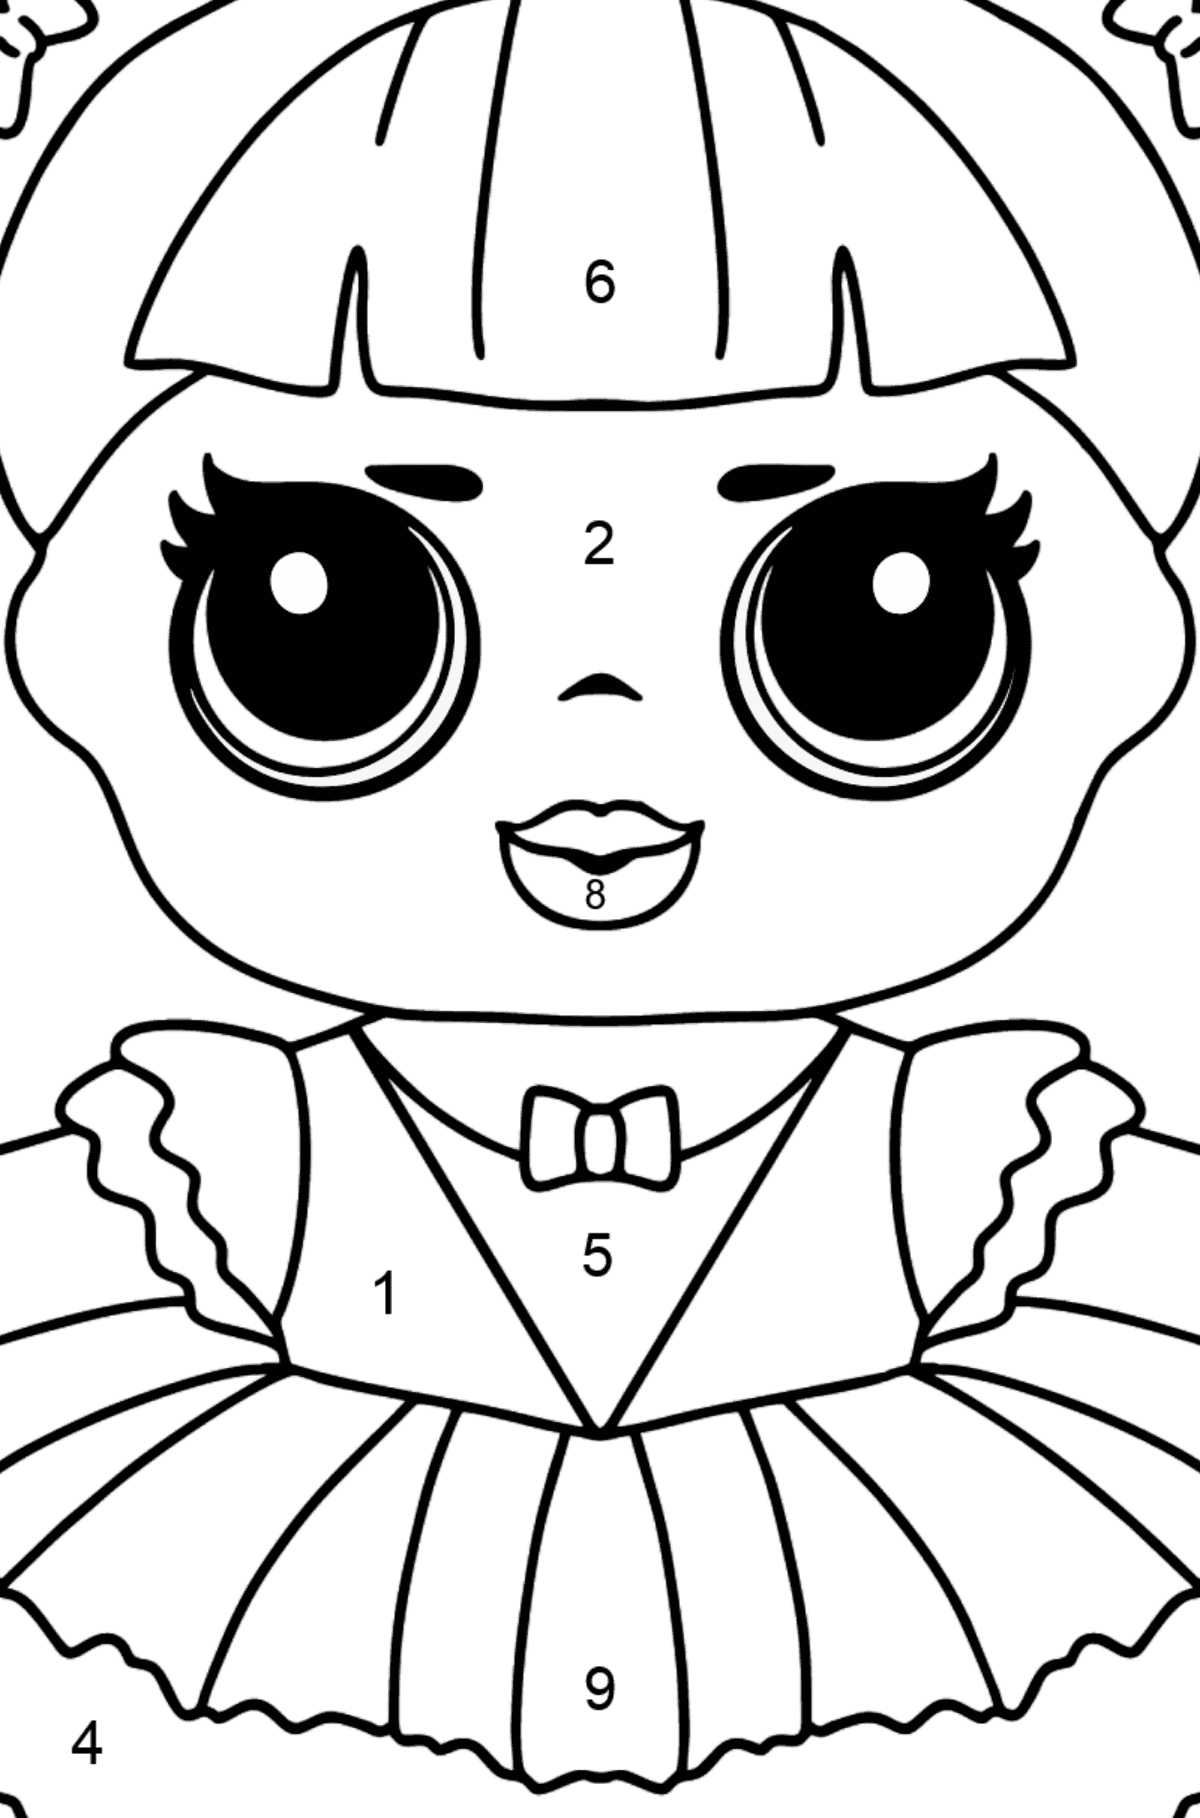 LOL Surprise Doll Center Stage Coloring page - Coloring by Numbers for Kids